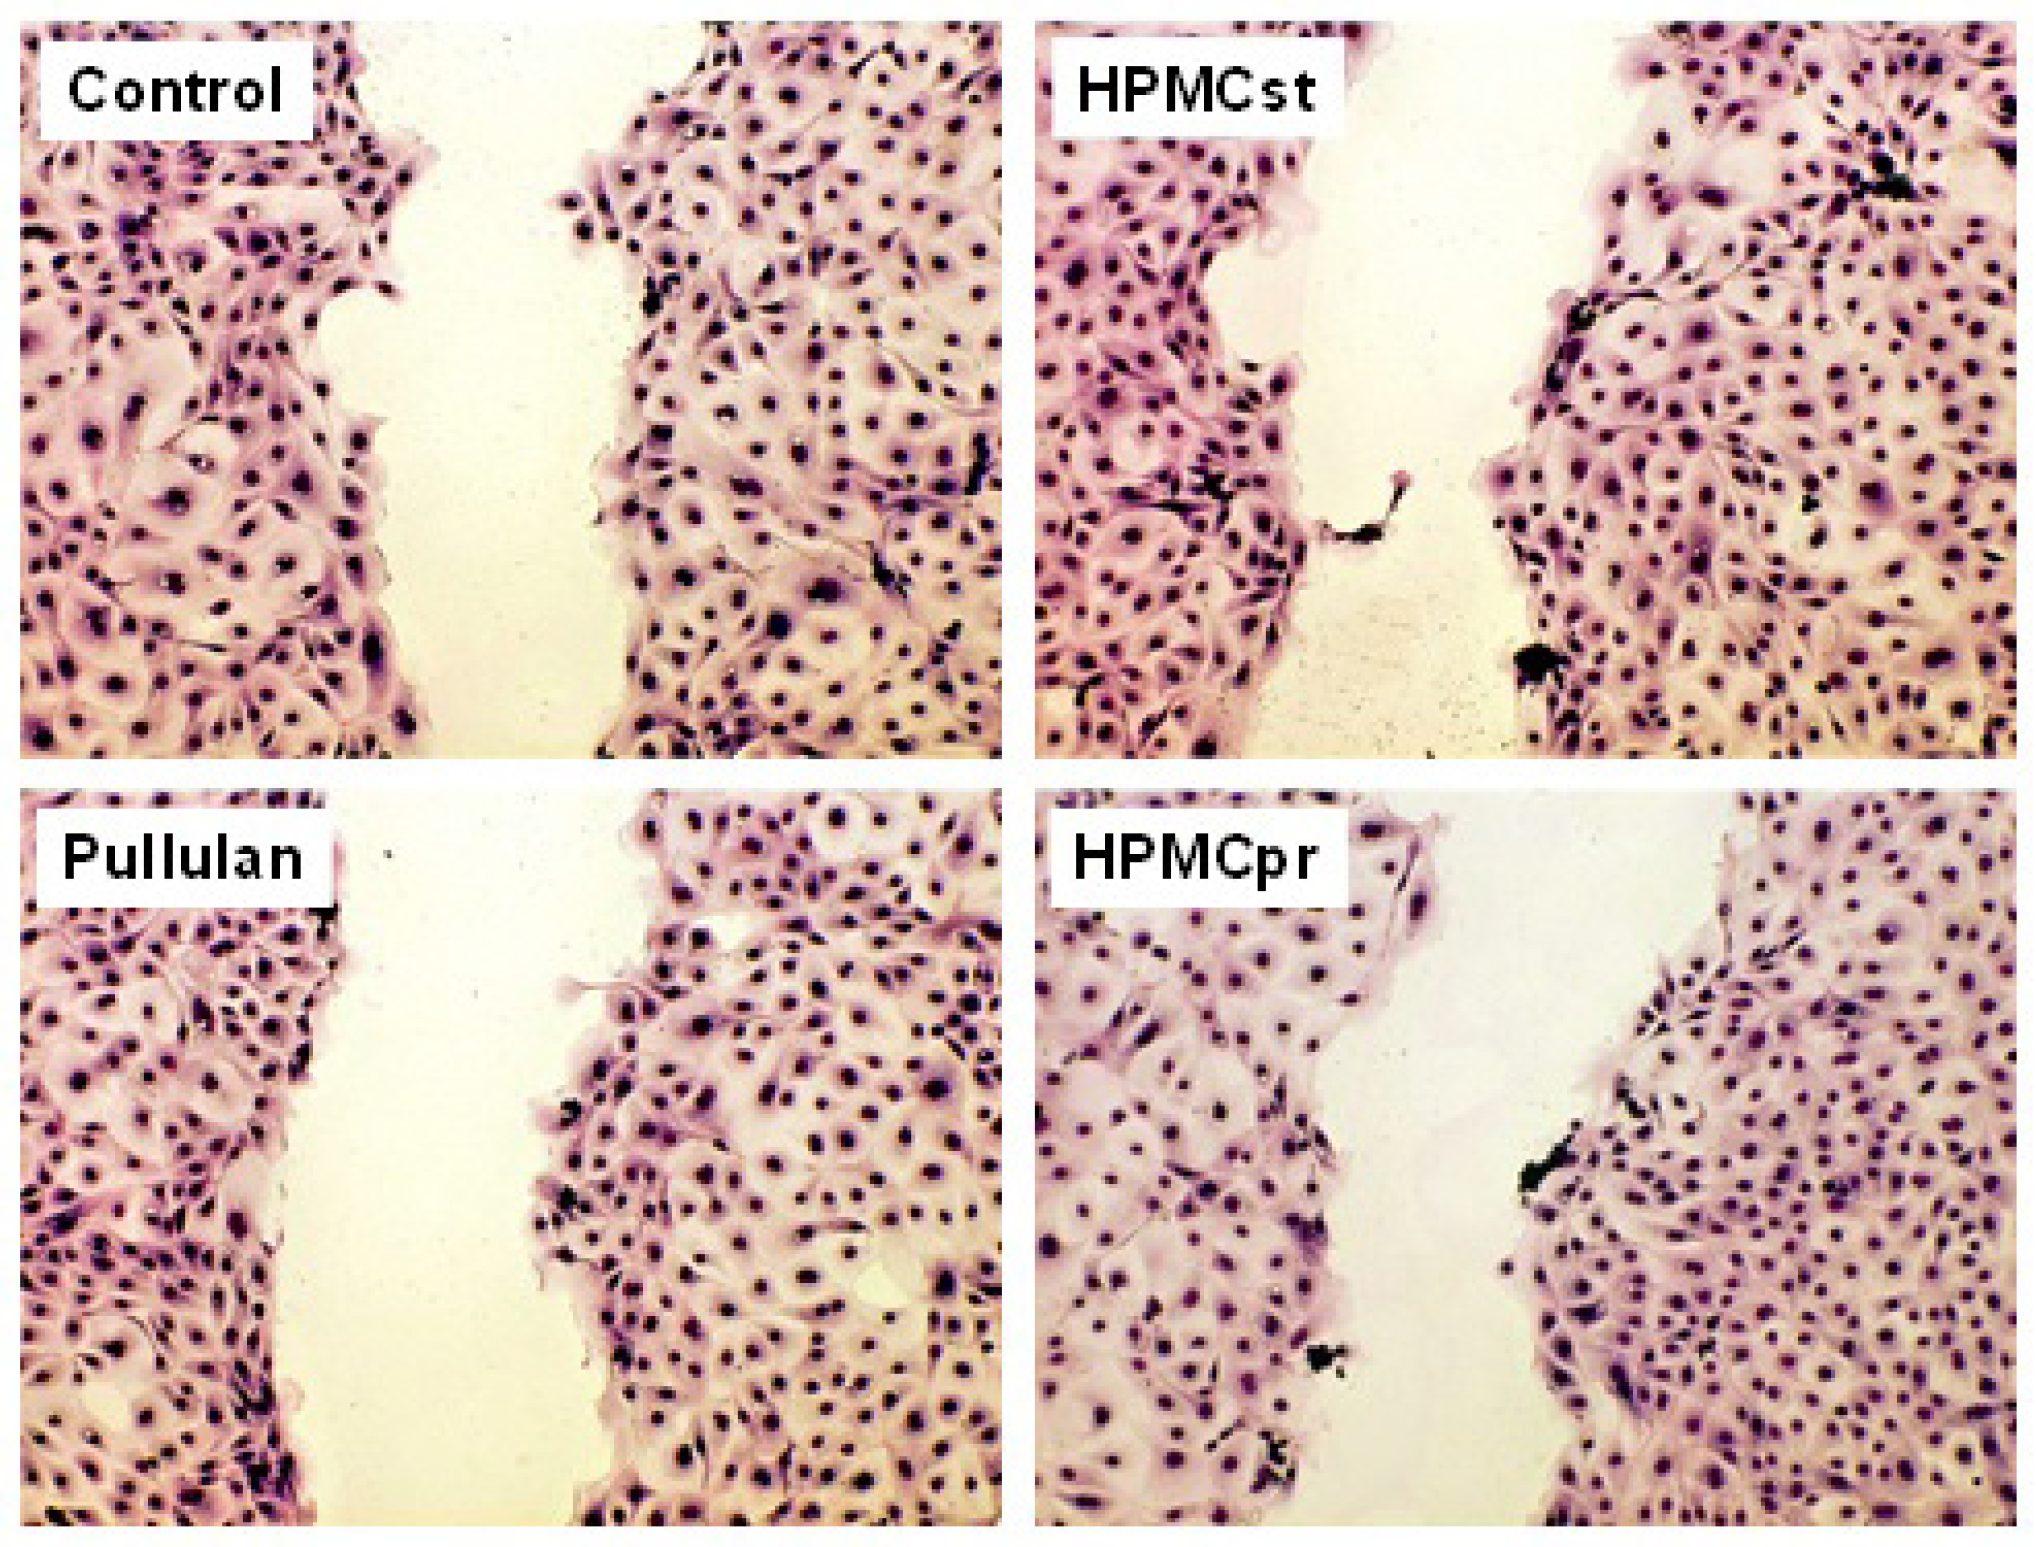 Wound healing process of intestinal epithelial cells (IPEC-J2) by colonization of a cell-free space within 24 hours at a dilution of 1:2.5 (= 1,600 μg/ml) for the different capsule solutions. Fixed and stained samples were photographed using an Olympus IX-50 inverted microscope with an Olympus 10x planachromate and an Olympus E-10 digital camera at 4-megapixel resolution. HPMCst = market standard HPMC capsules; HPMCpr = polyethylene glycol and carrageen free capsules.